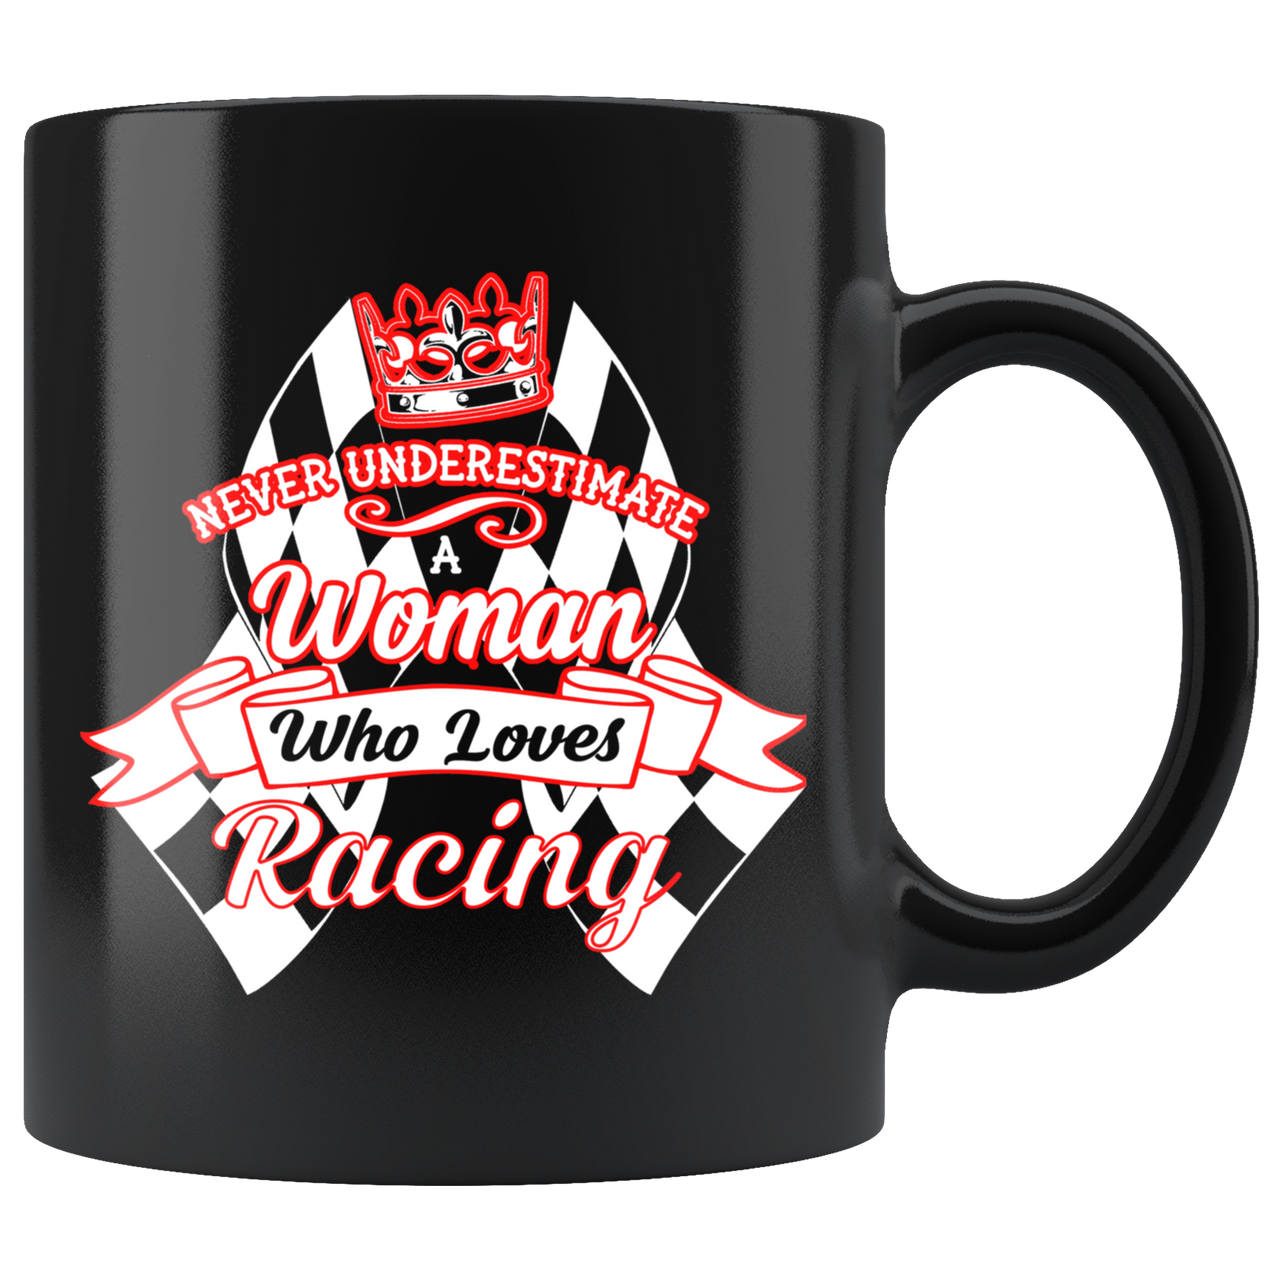 Never Underestimate A Woman Who Loves Racing Mug!